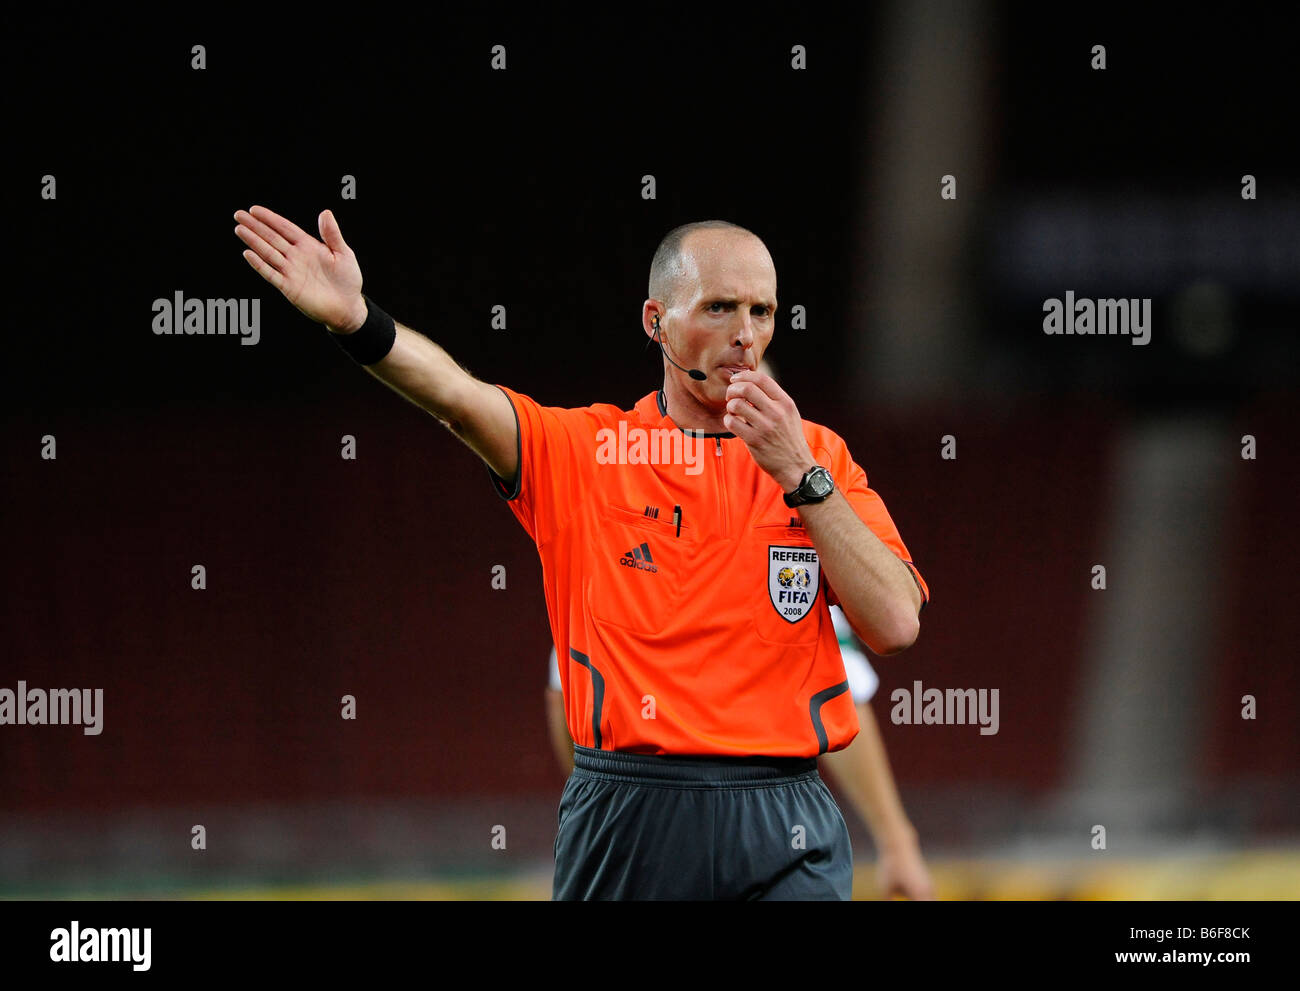 FIFA referee Michael Leslie DEAN, England, blowing whistle and gesticulating Stock Photo